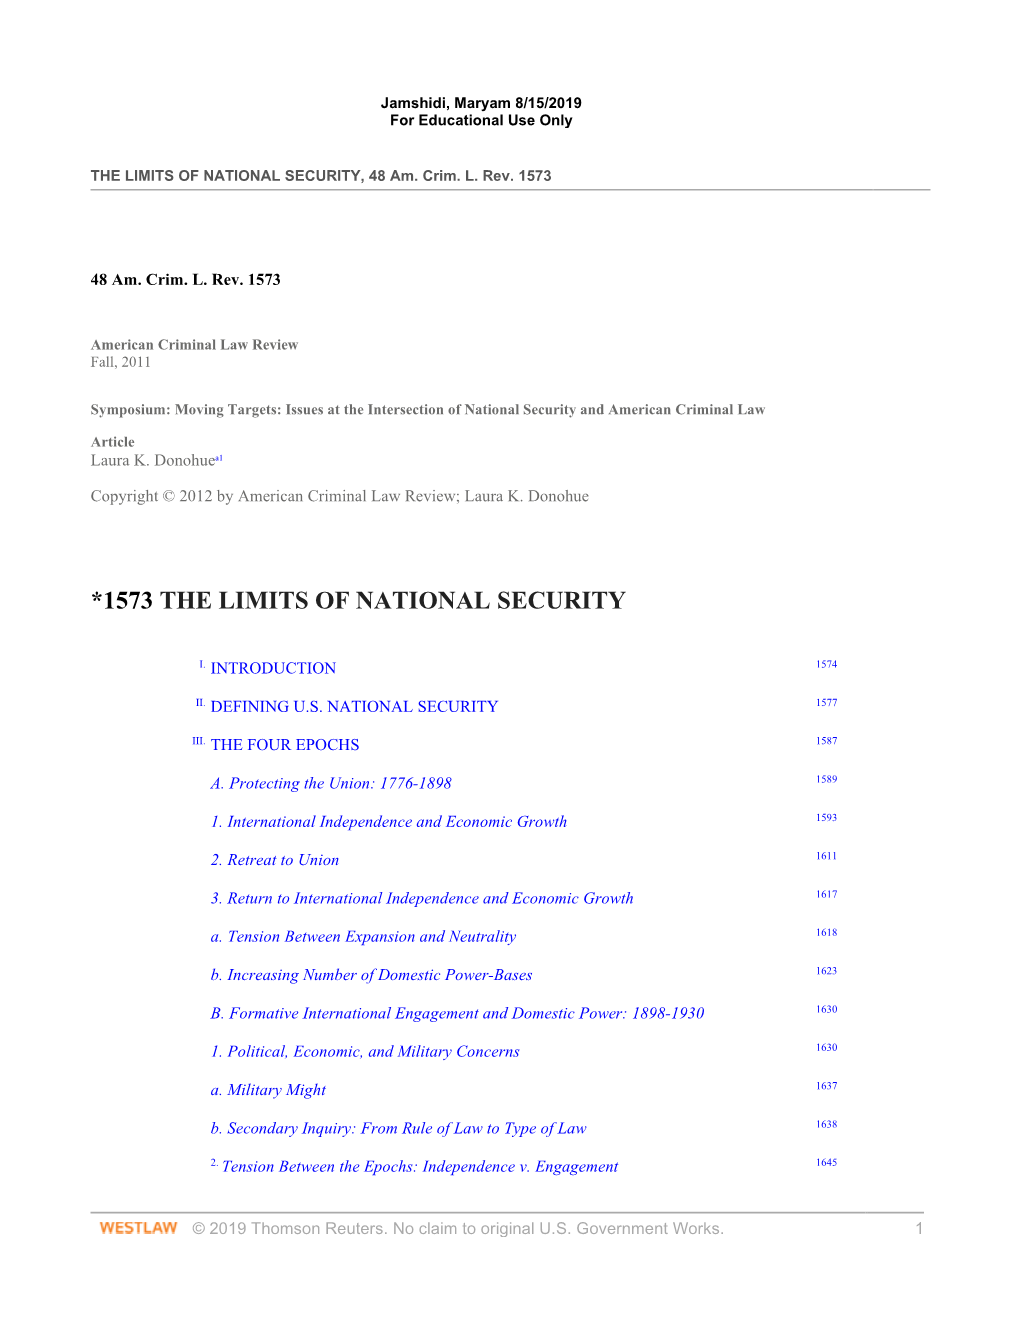 *1573 the Limits of National Security